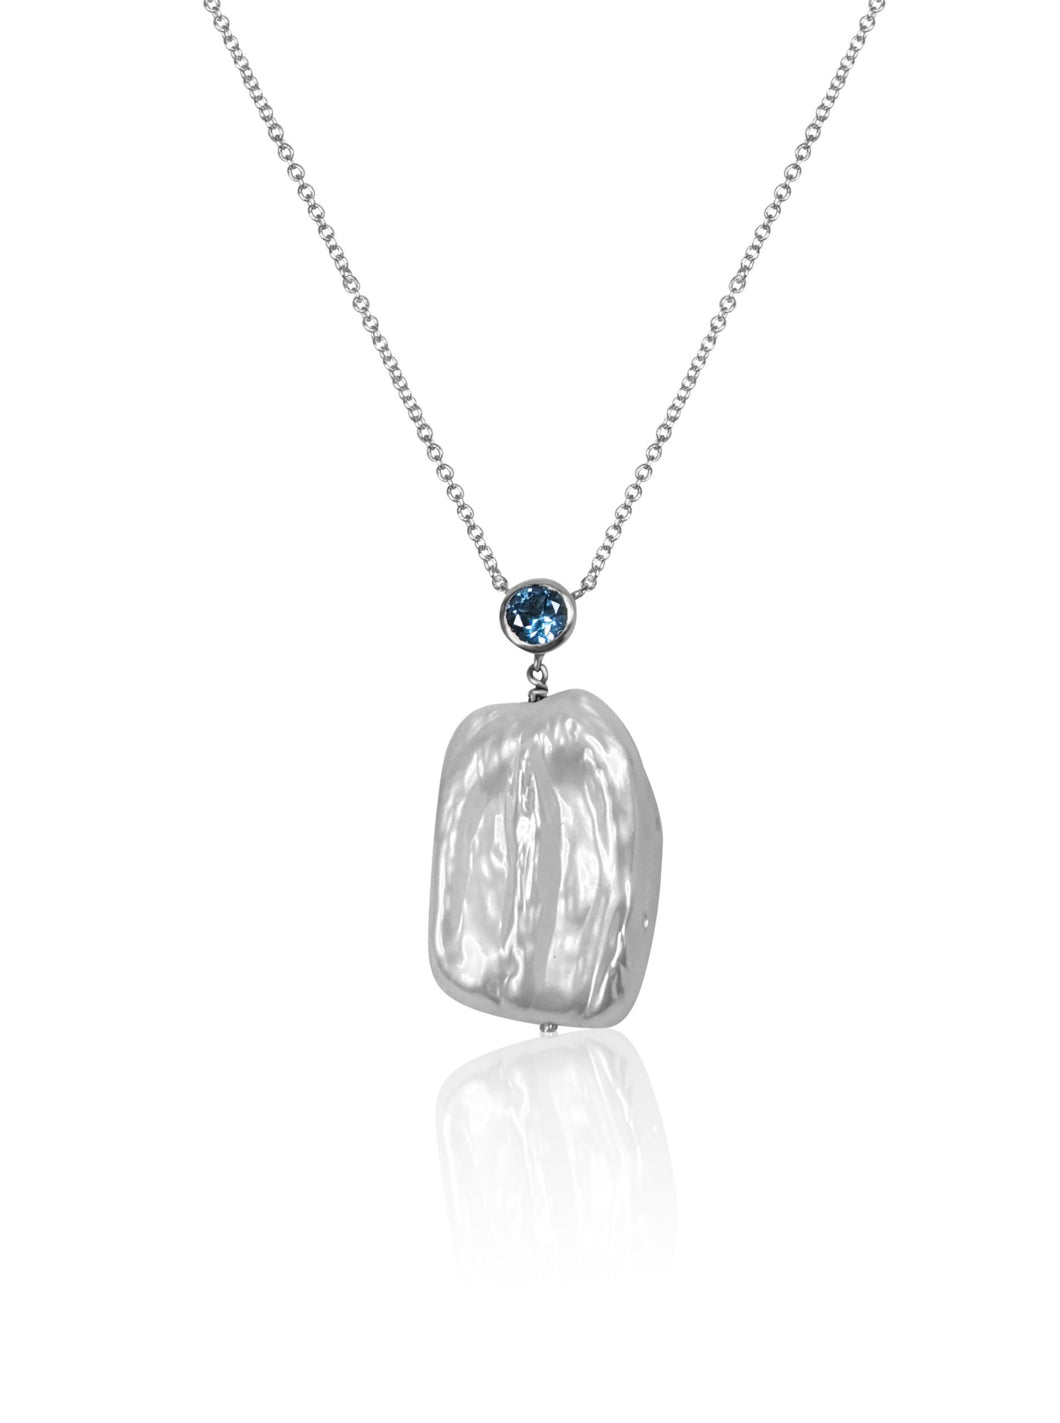 BAROQUE PEARL AND SWISS BLUE TOPAZ NECKLACE